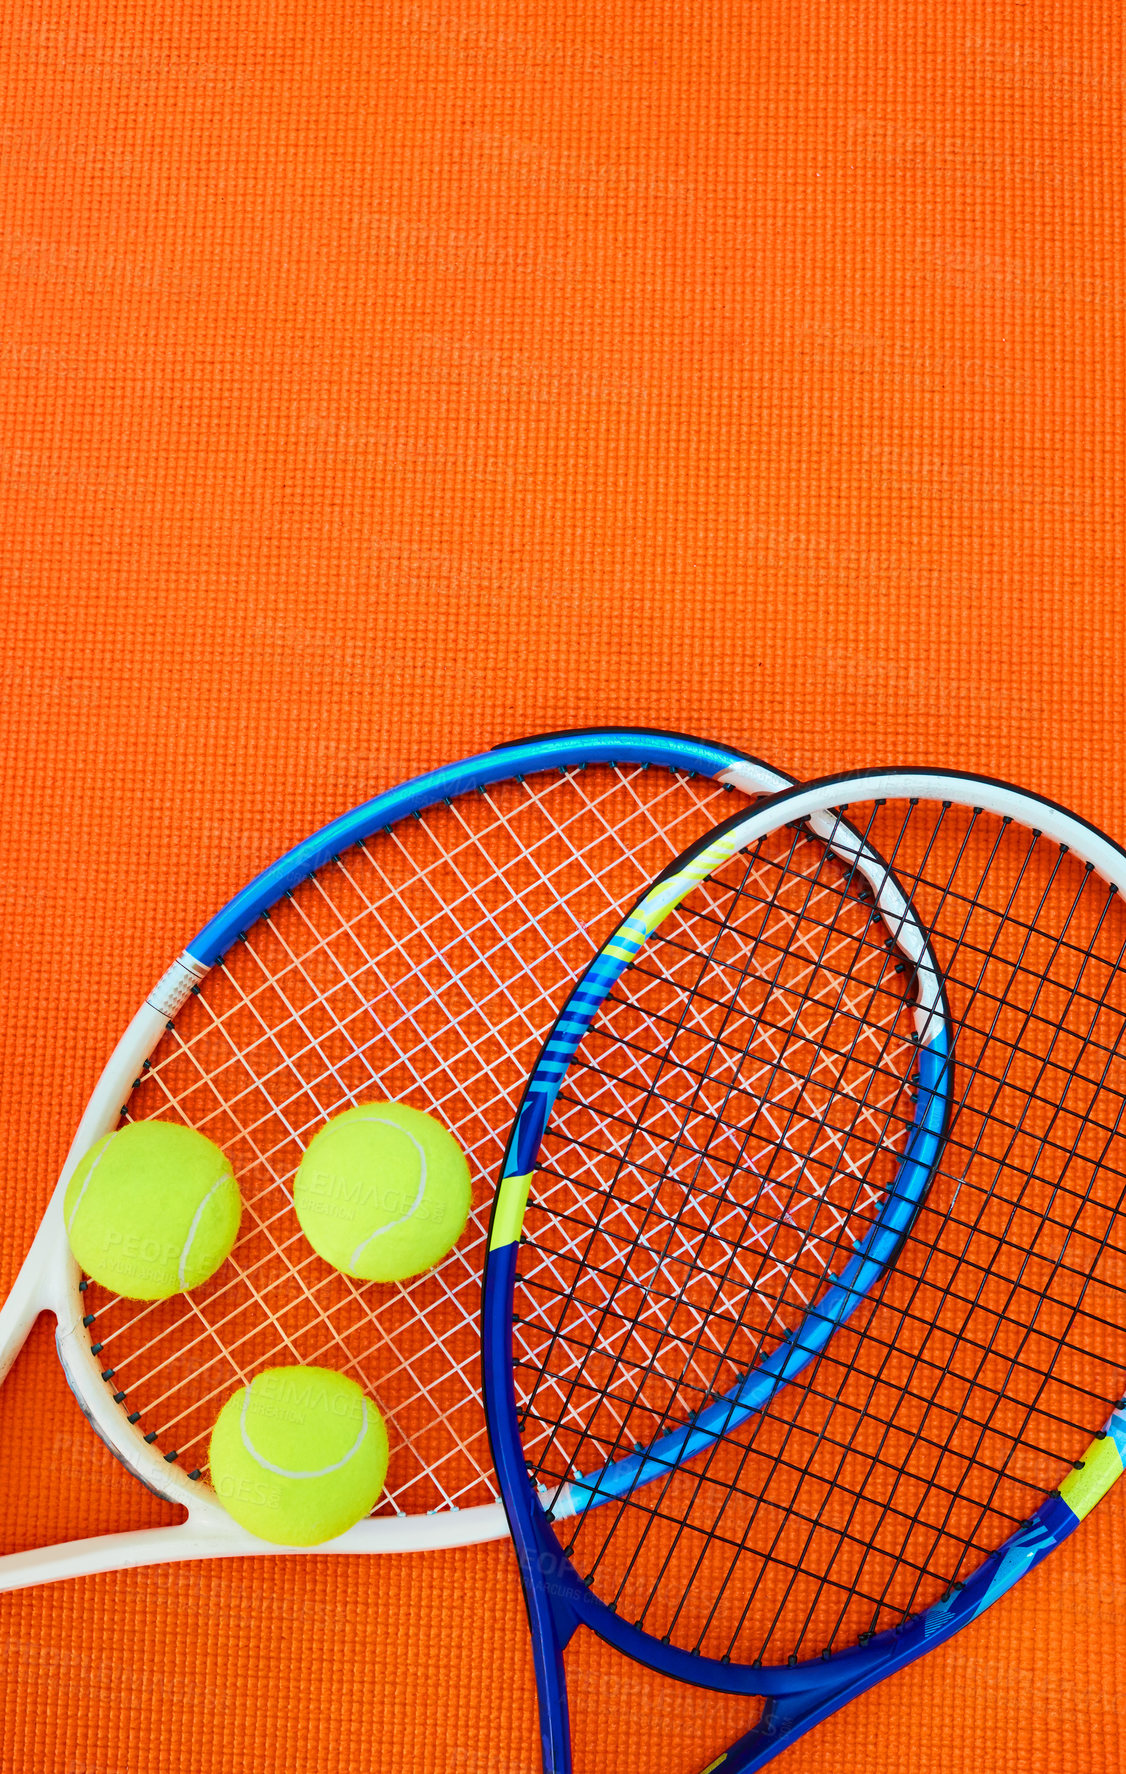 Buy stock photo High angle shot of tennis essentials placed on top of an orange background inside of a studio